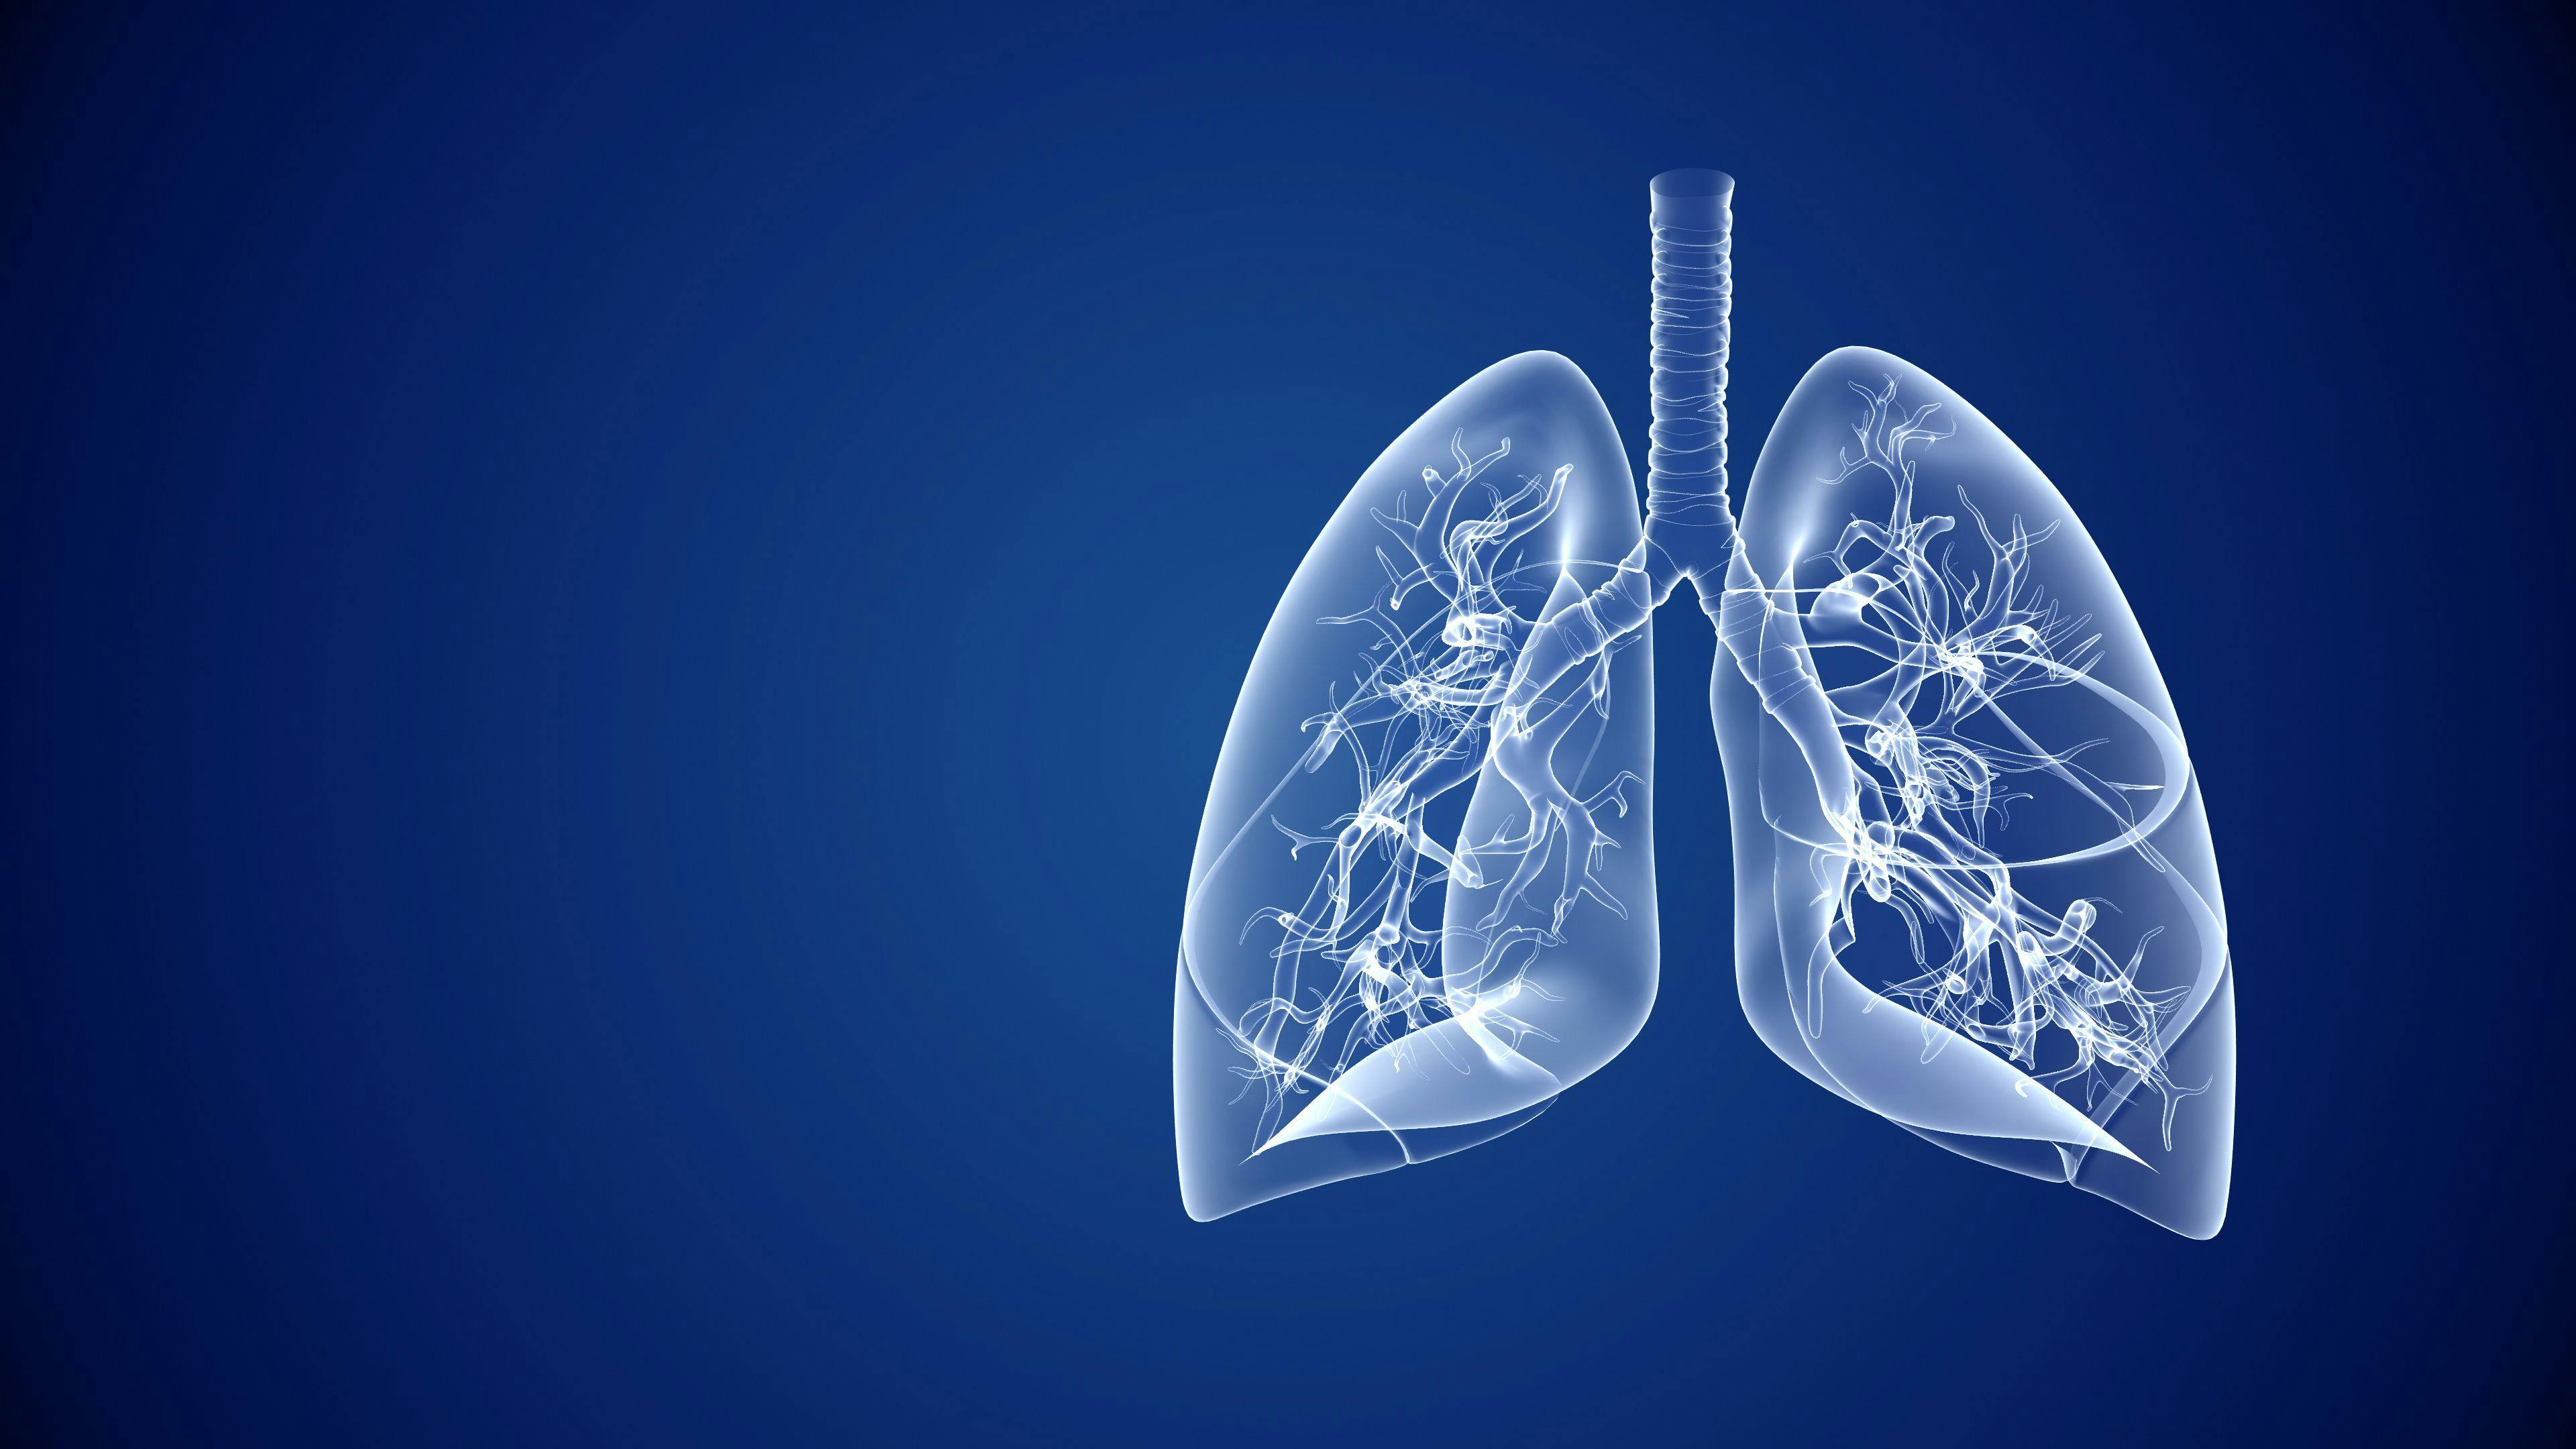 Lung Model | image credit: Silver Place - stock.adobe.com